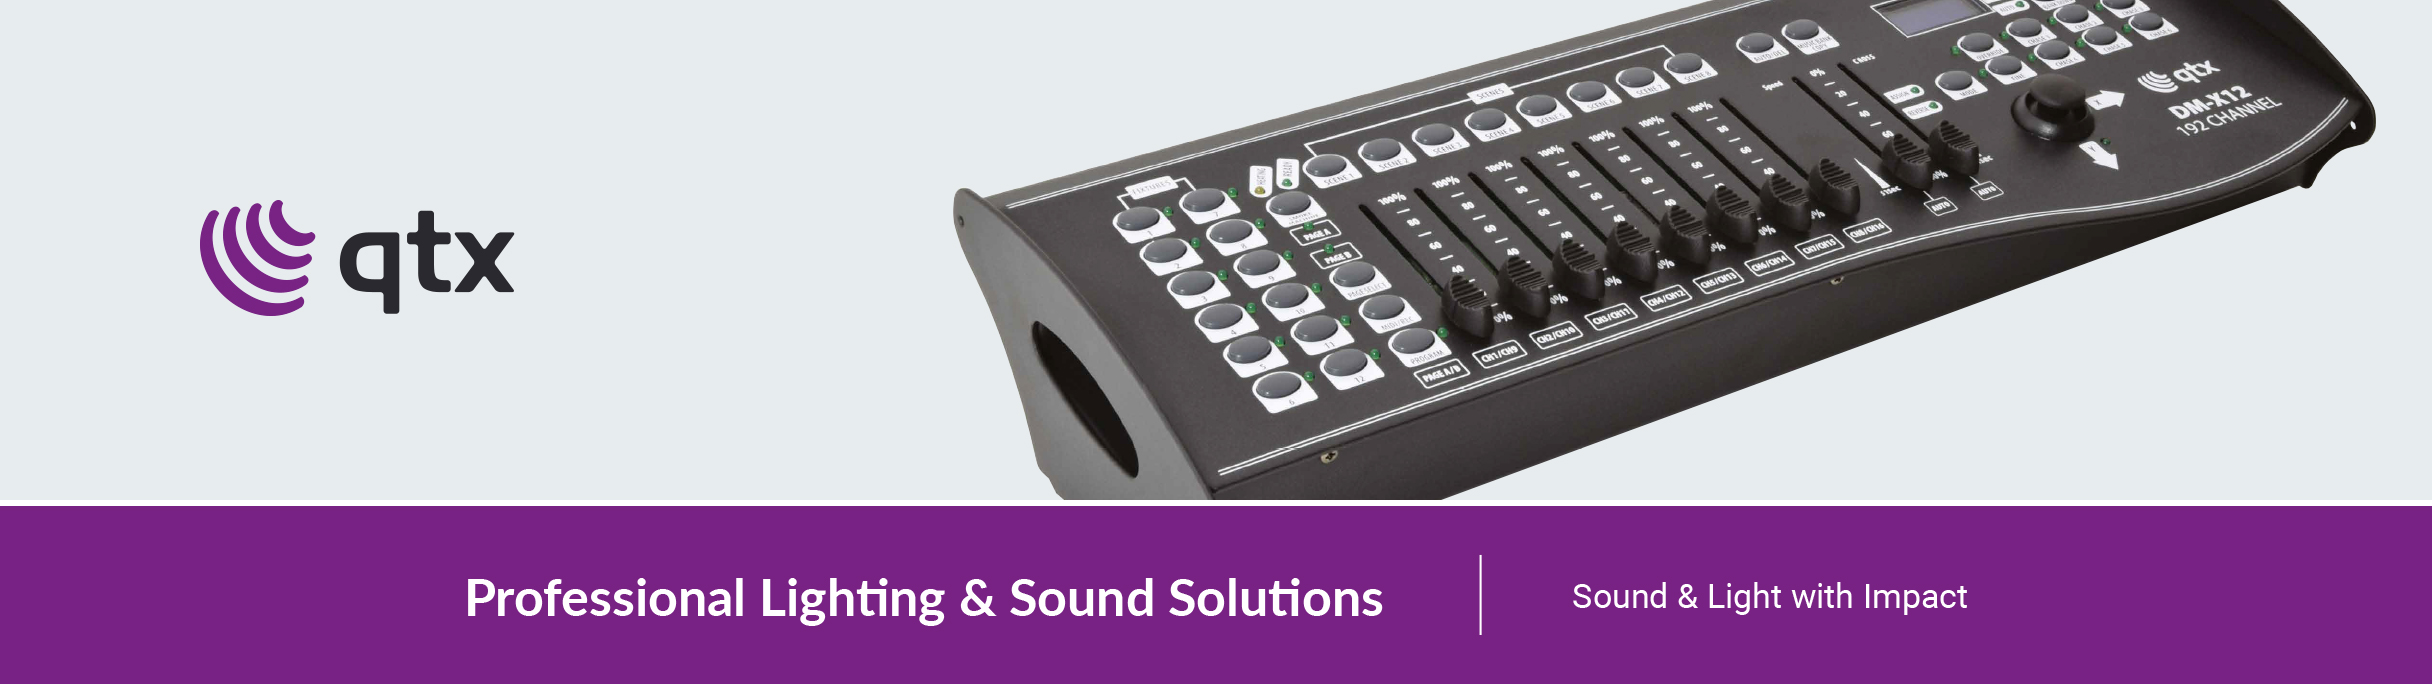 QTX - Professional Lighting & Sound Solutions - Sound & Light with Impact